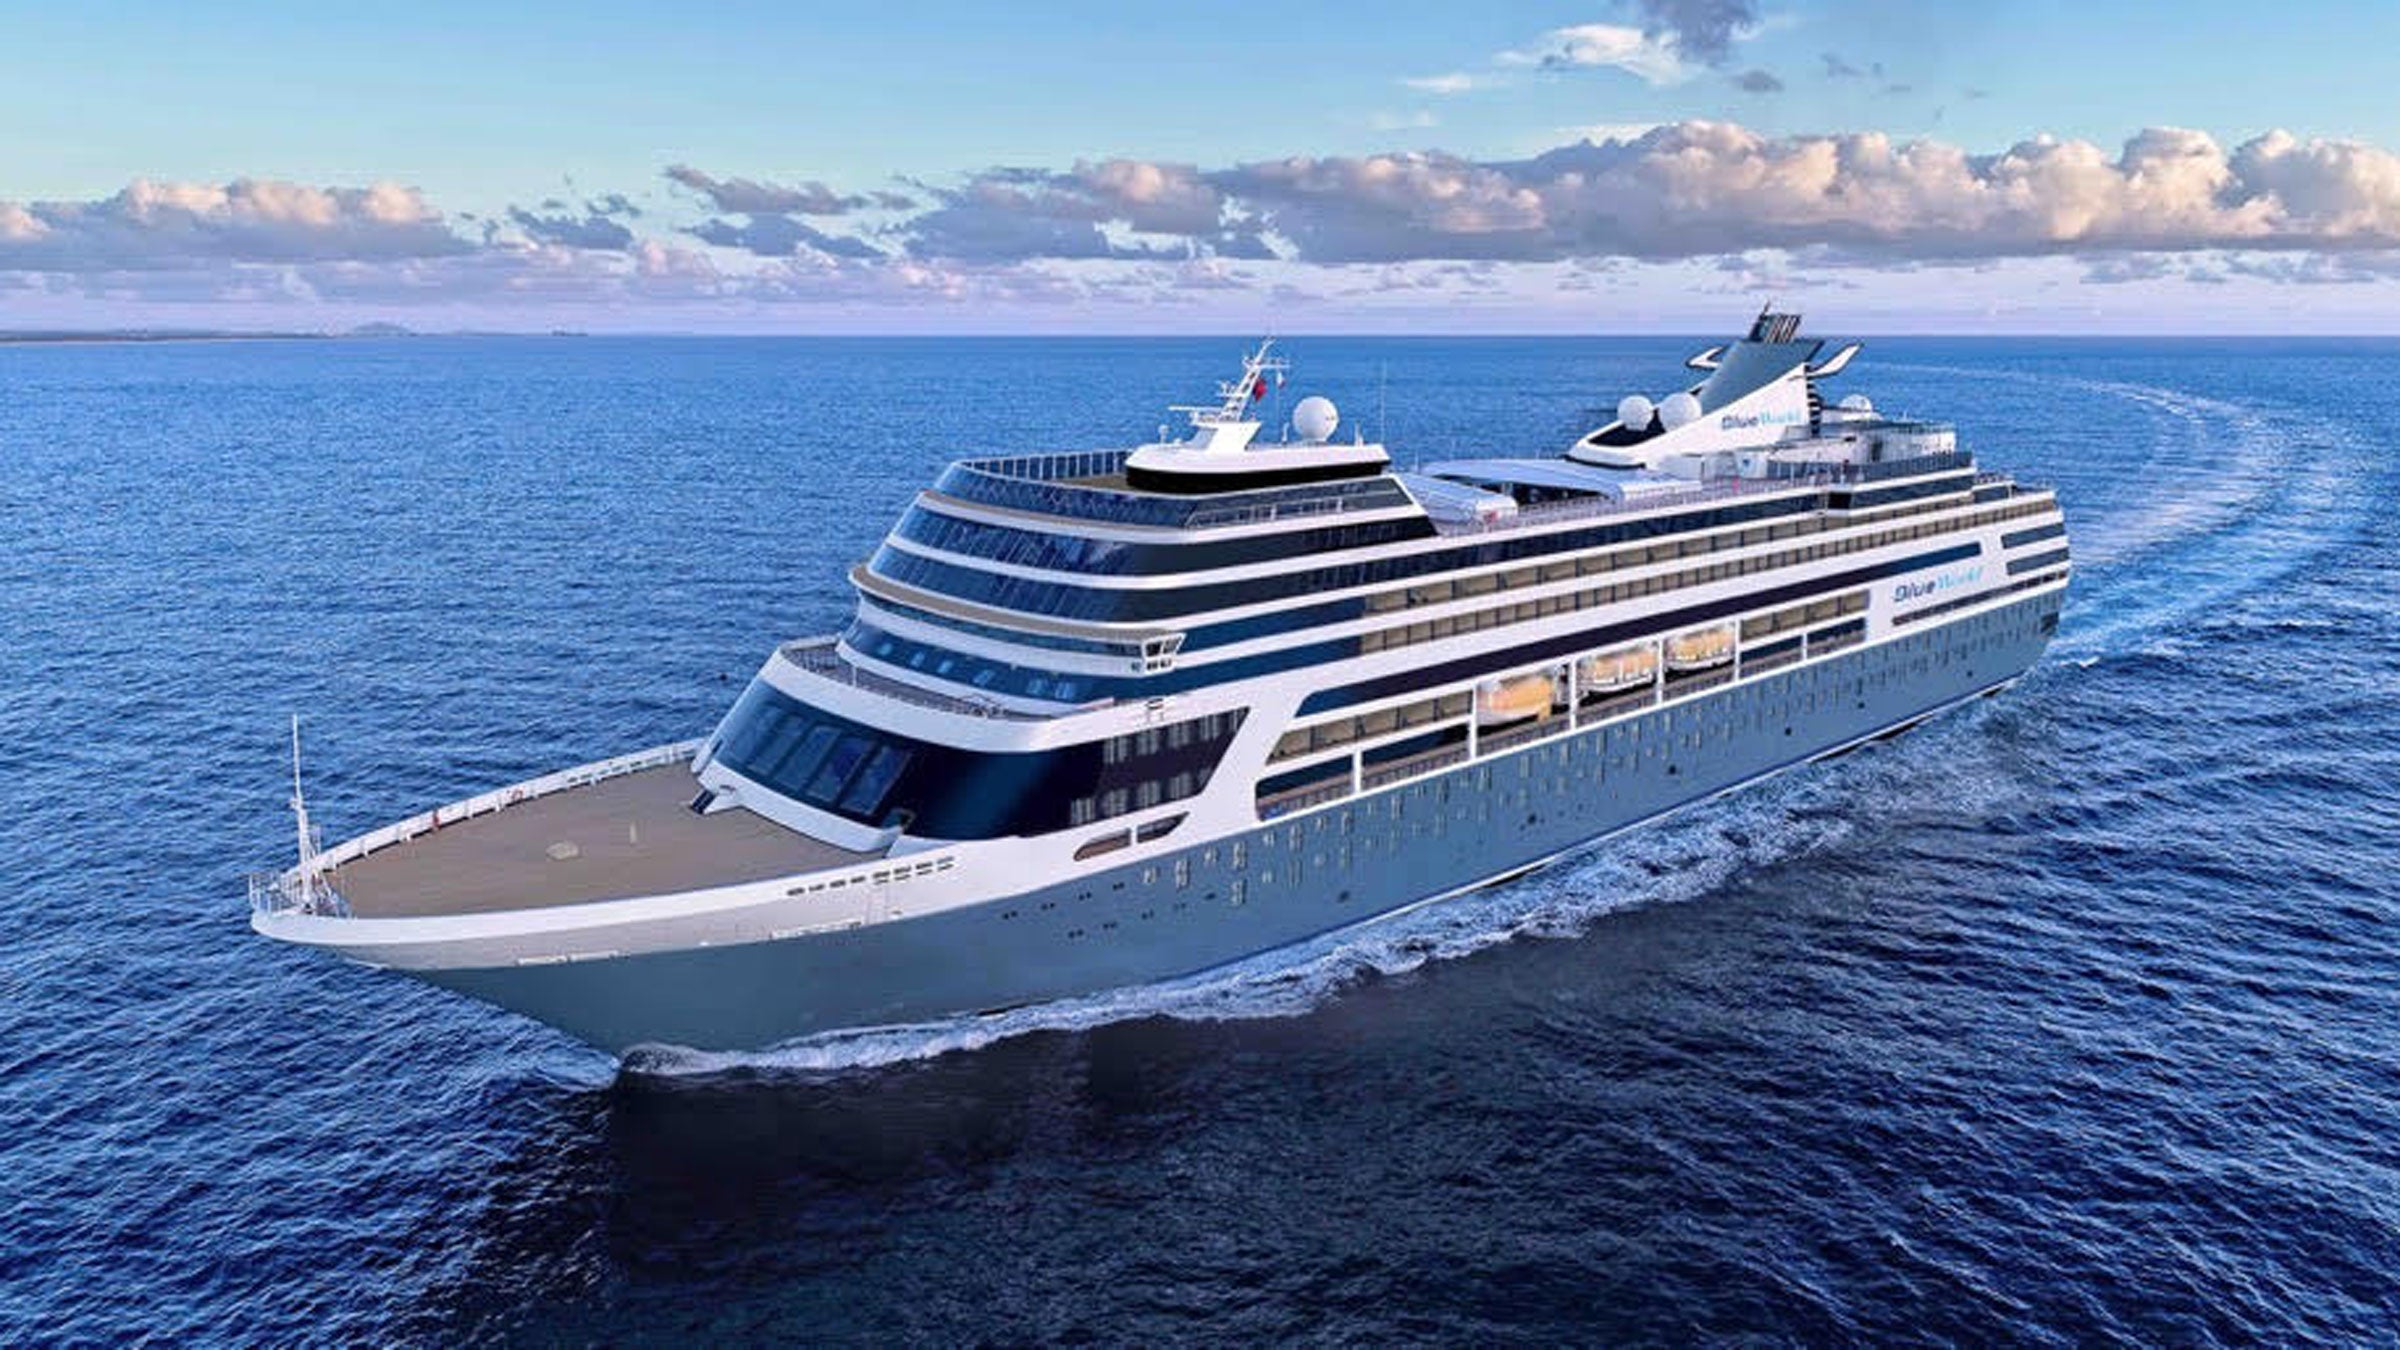 A New Cruise Line for Active, Health-Focused Travelers